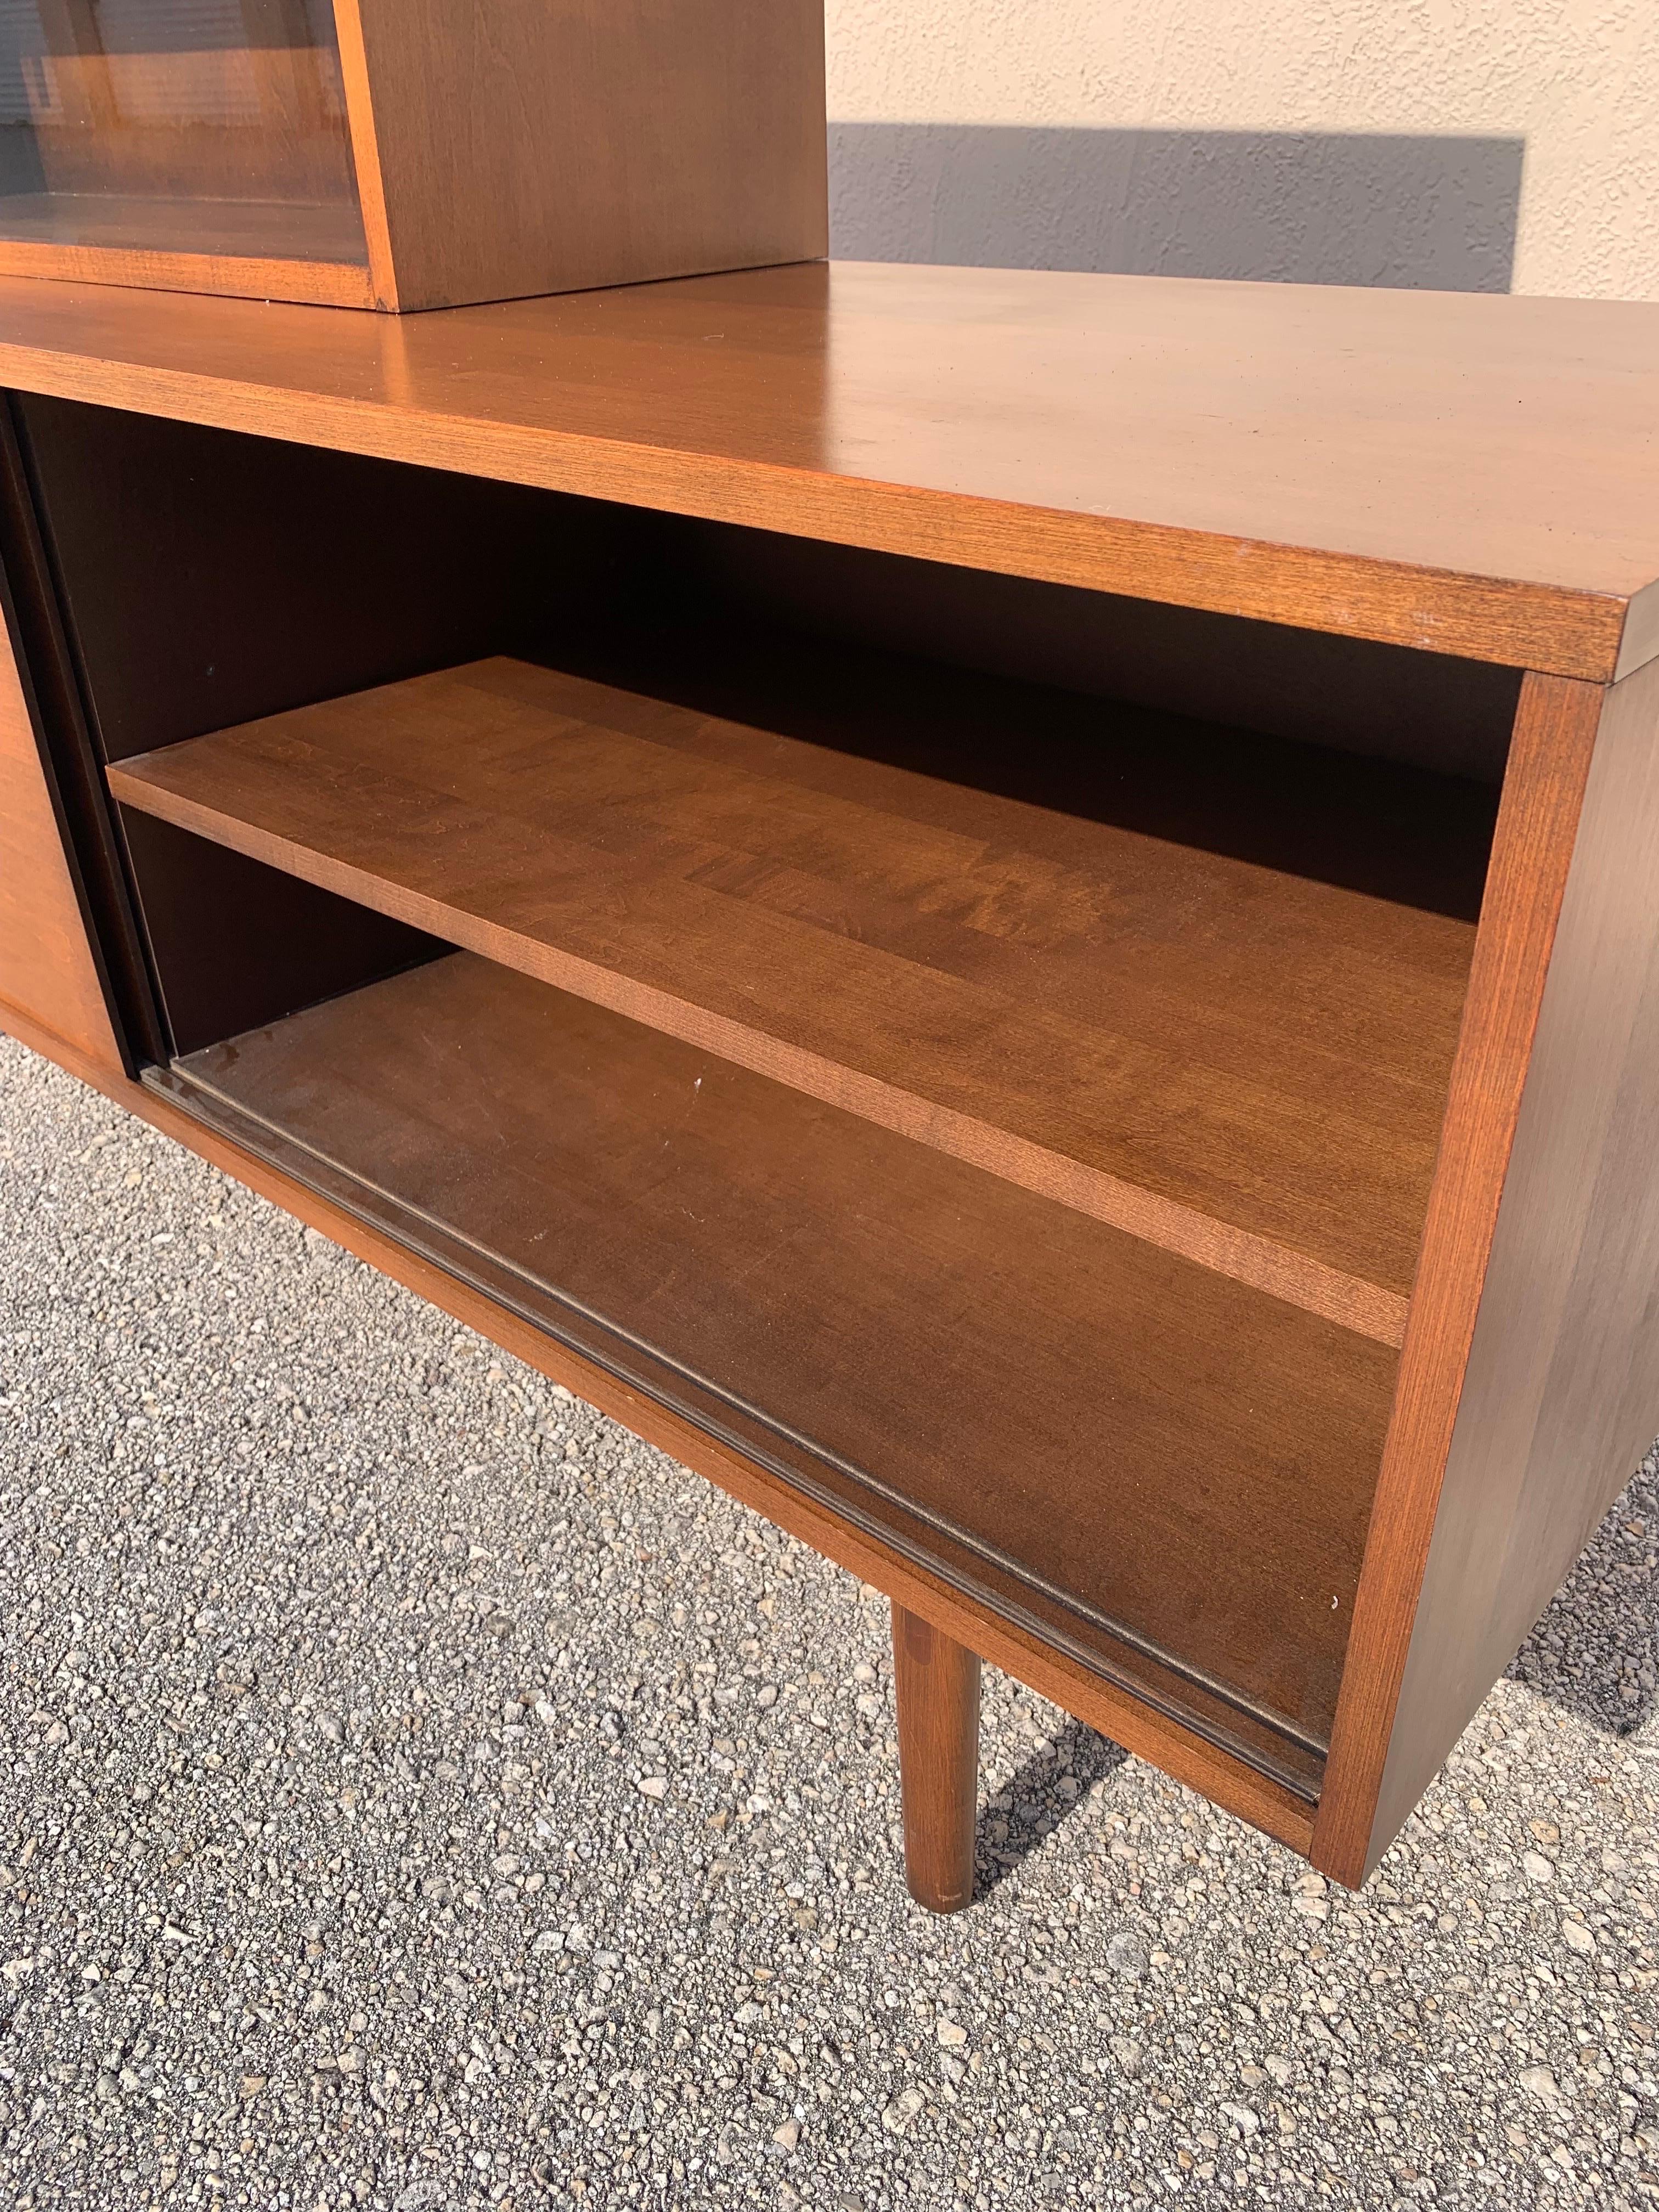 Mid-Century Modern Credenza by Paul McCobb for Planner Group #1513 For Sale 6